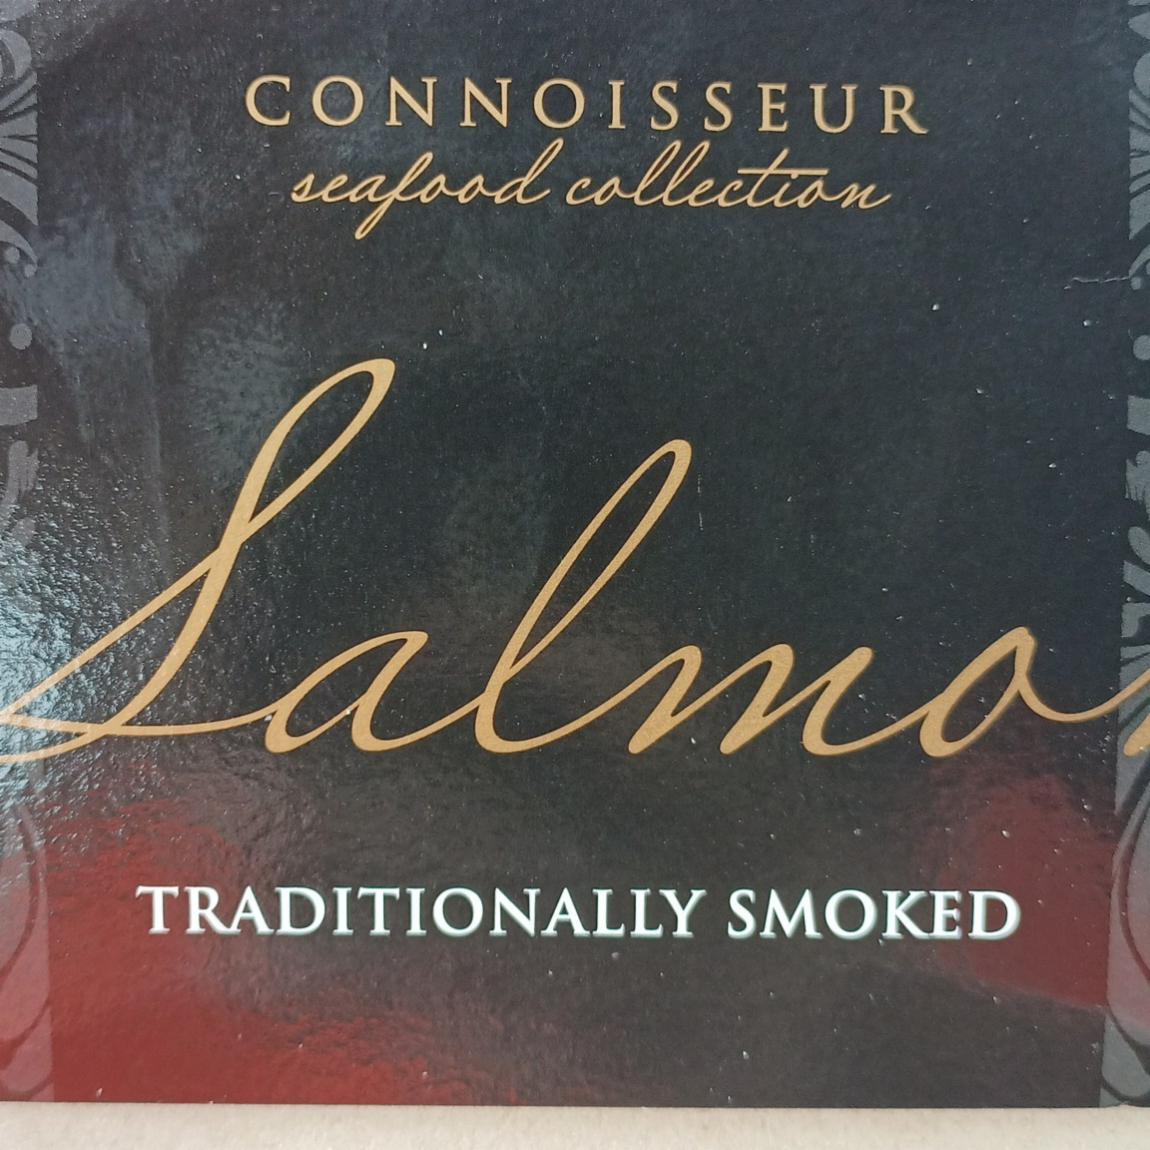 Fotografie - Salmon traditionally smoked Connoisseur seafood collection